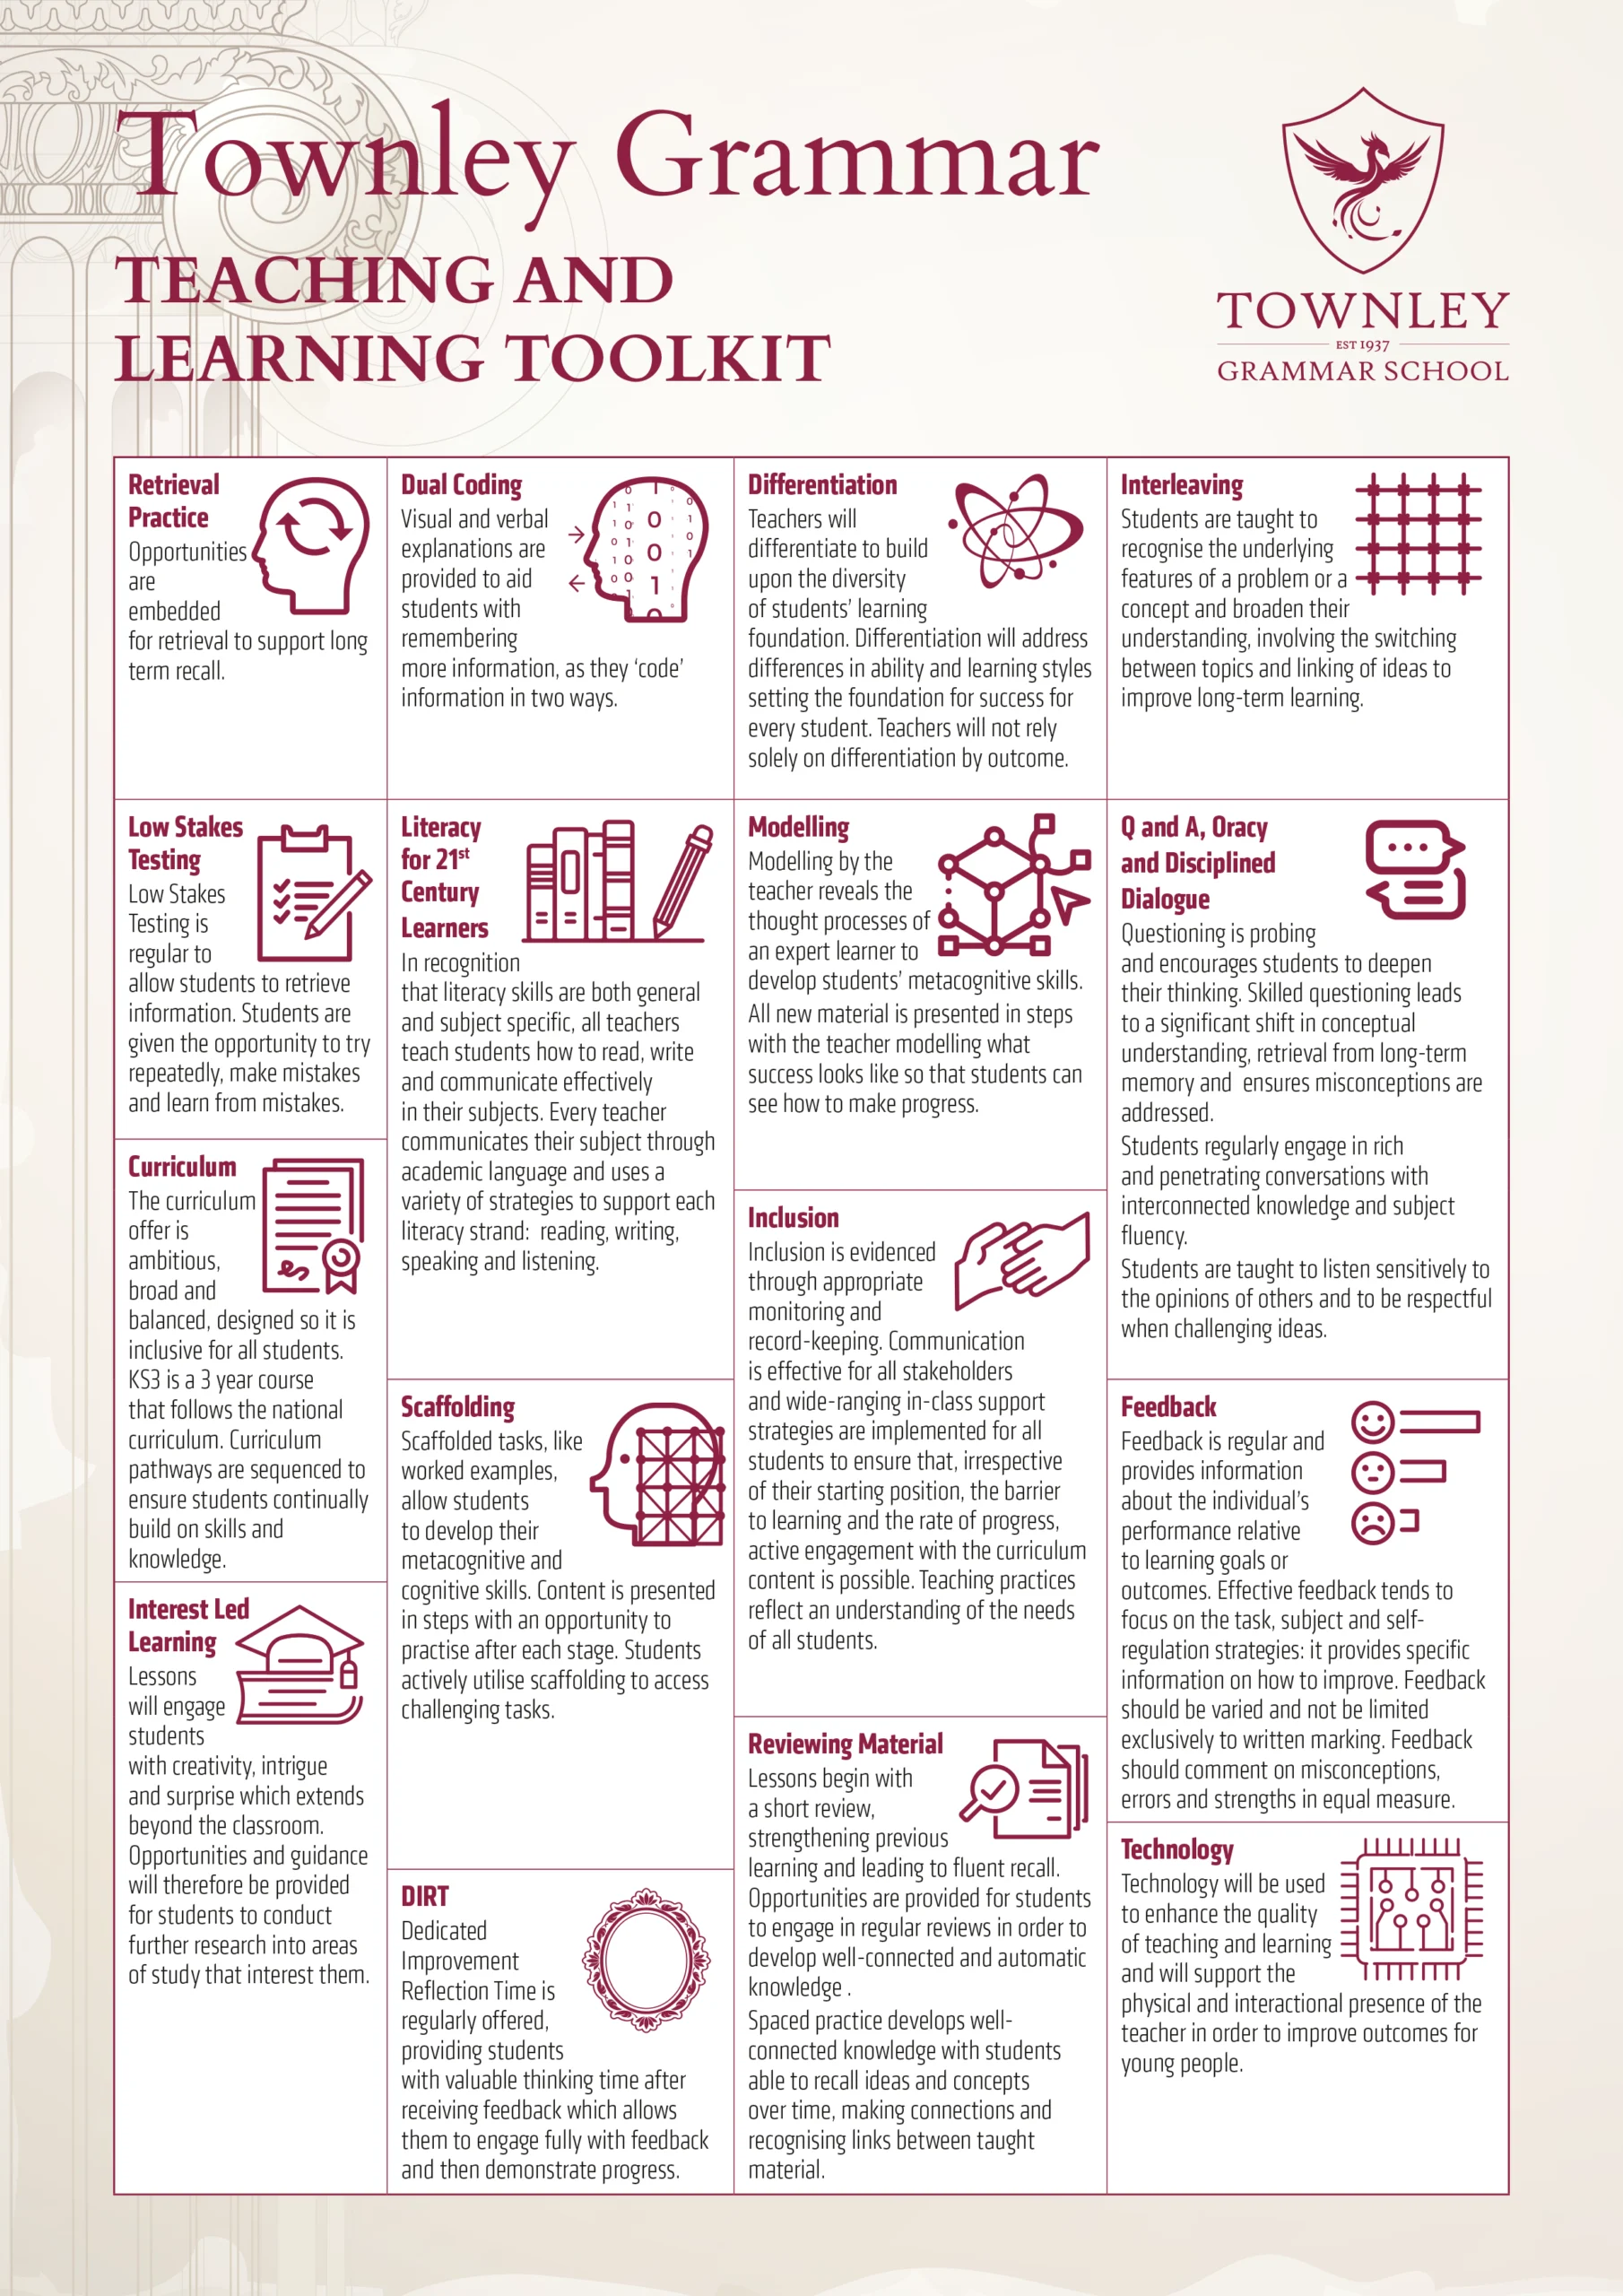 The Townley Teaching and Learning Toolkit